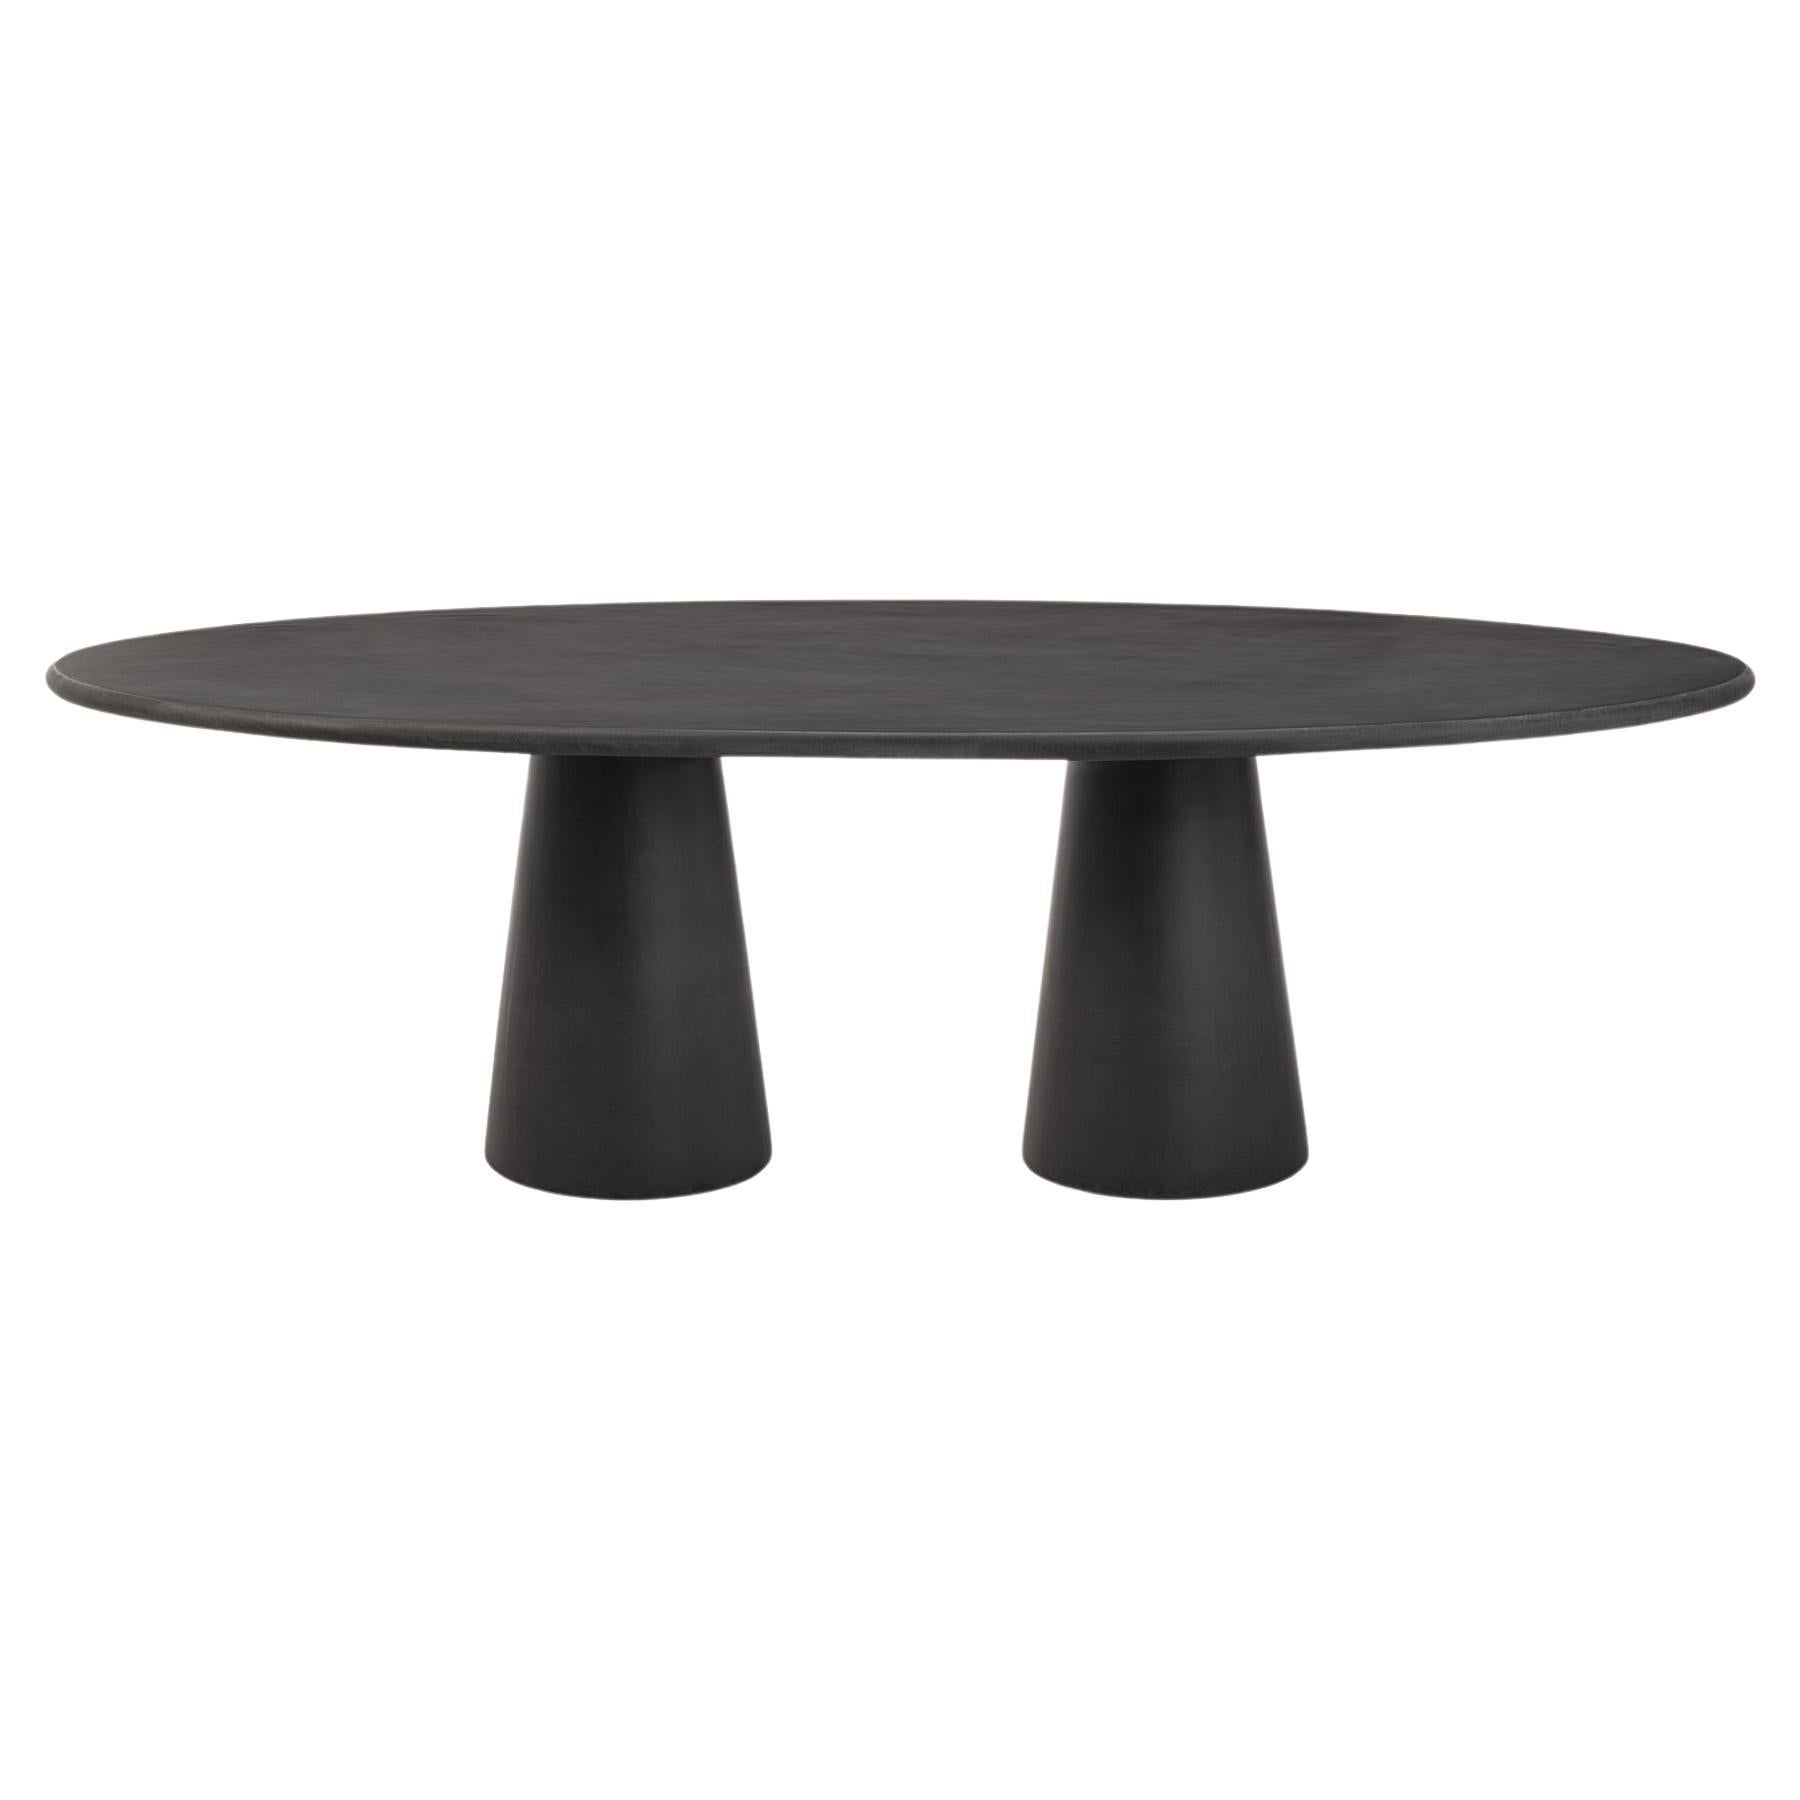 Contemporary Oval Natural Plaster "Ellipsis" Table 320cm by Isabelle Beaumont For Sale